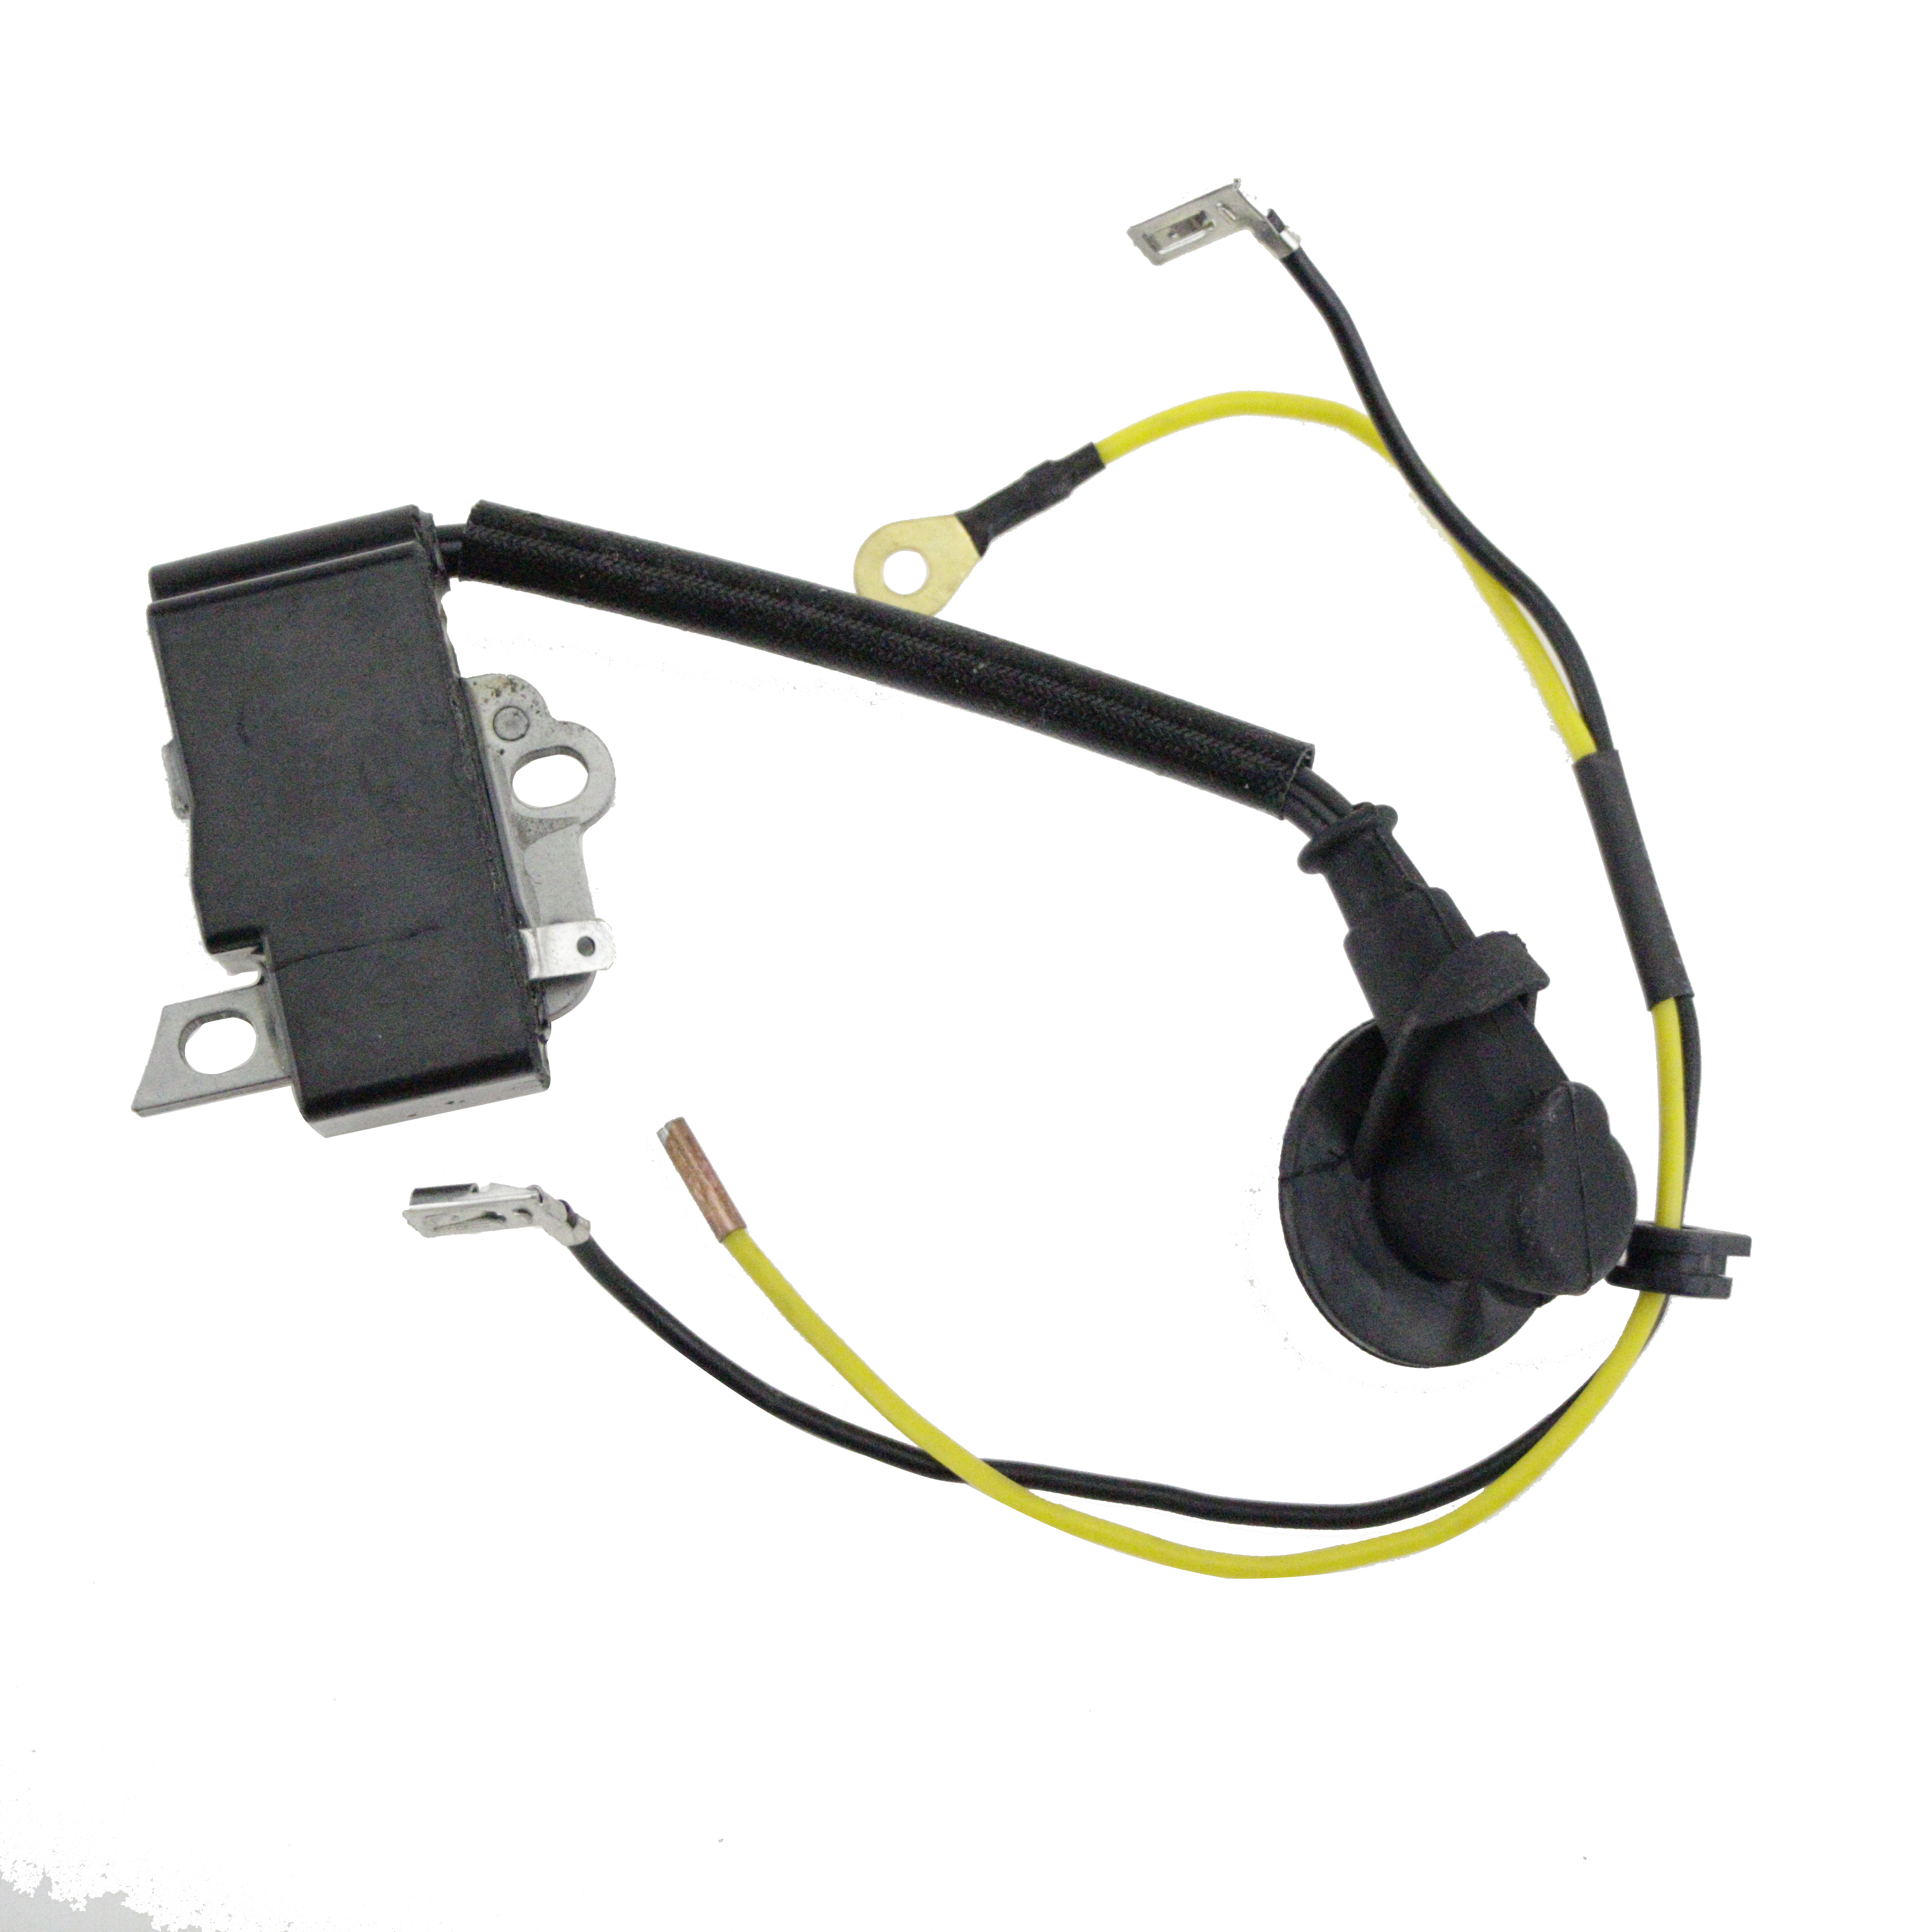 Ignition Coil For Stihl Ms251 Ms261c Replace 1141 400 1307 Chainsaw Part New 